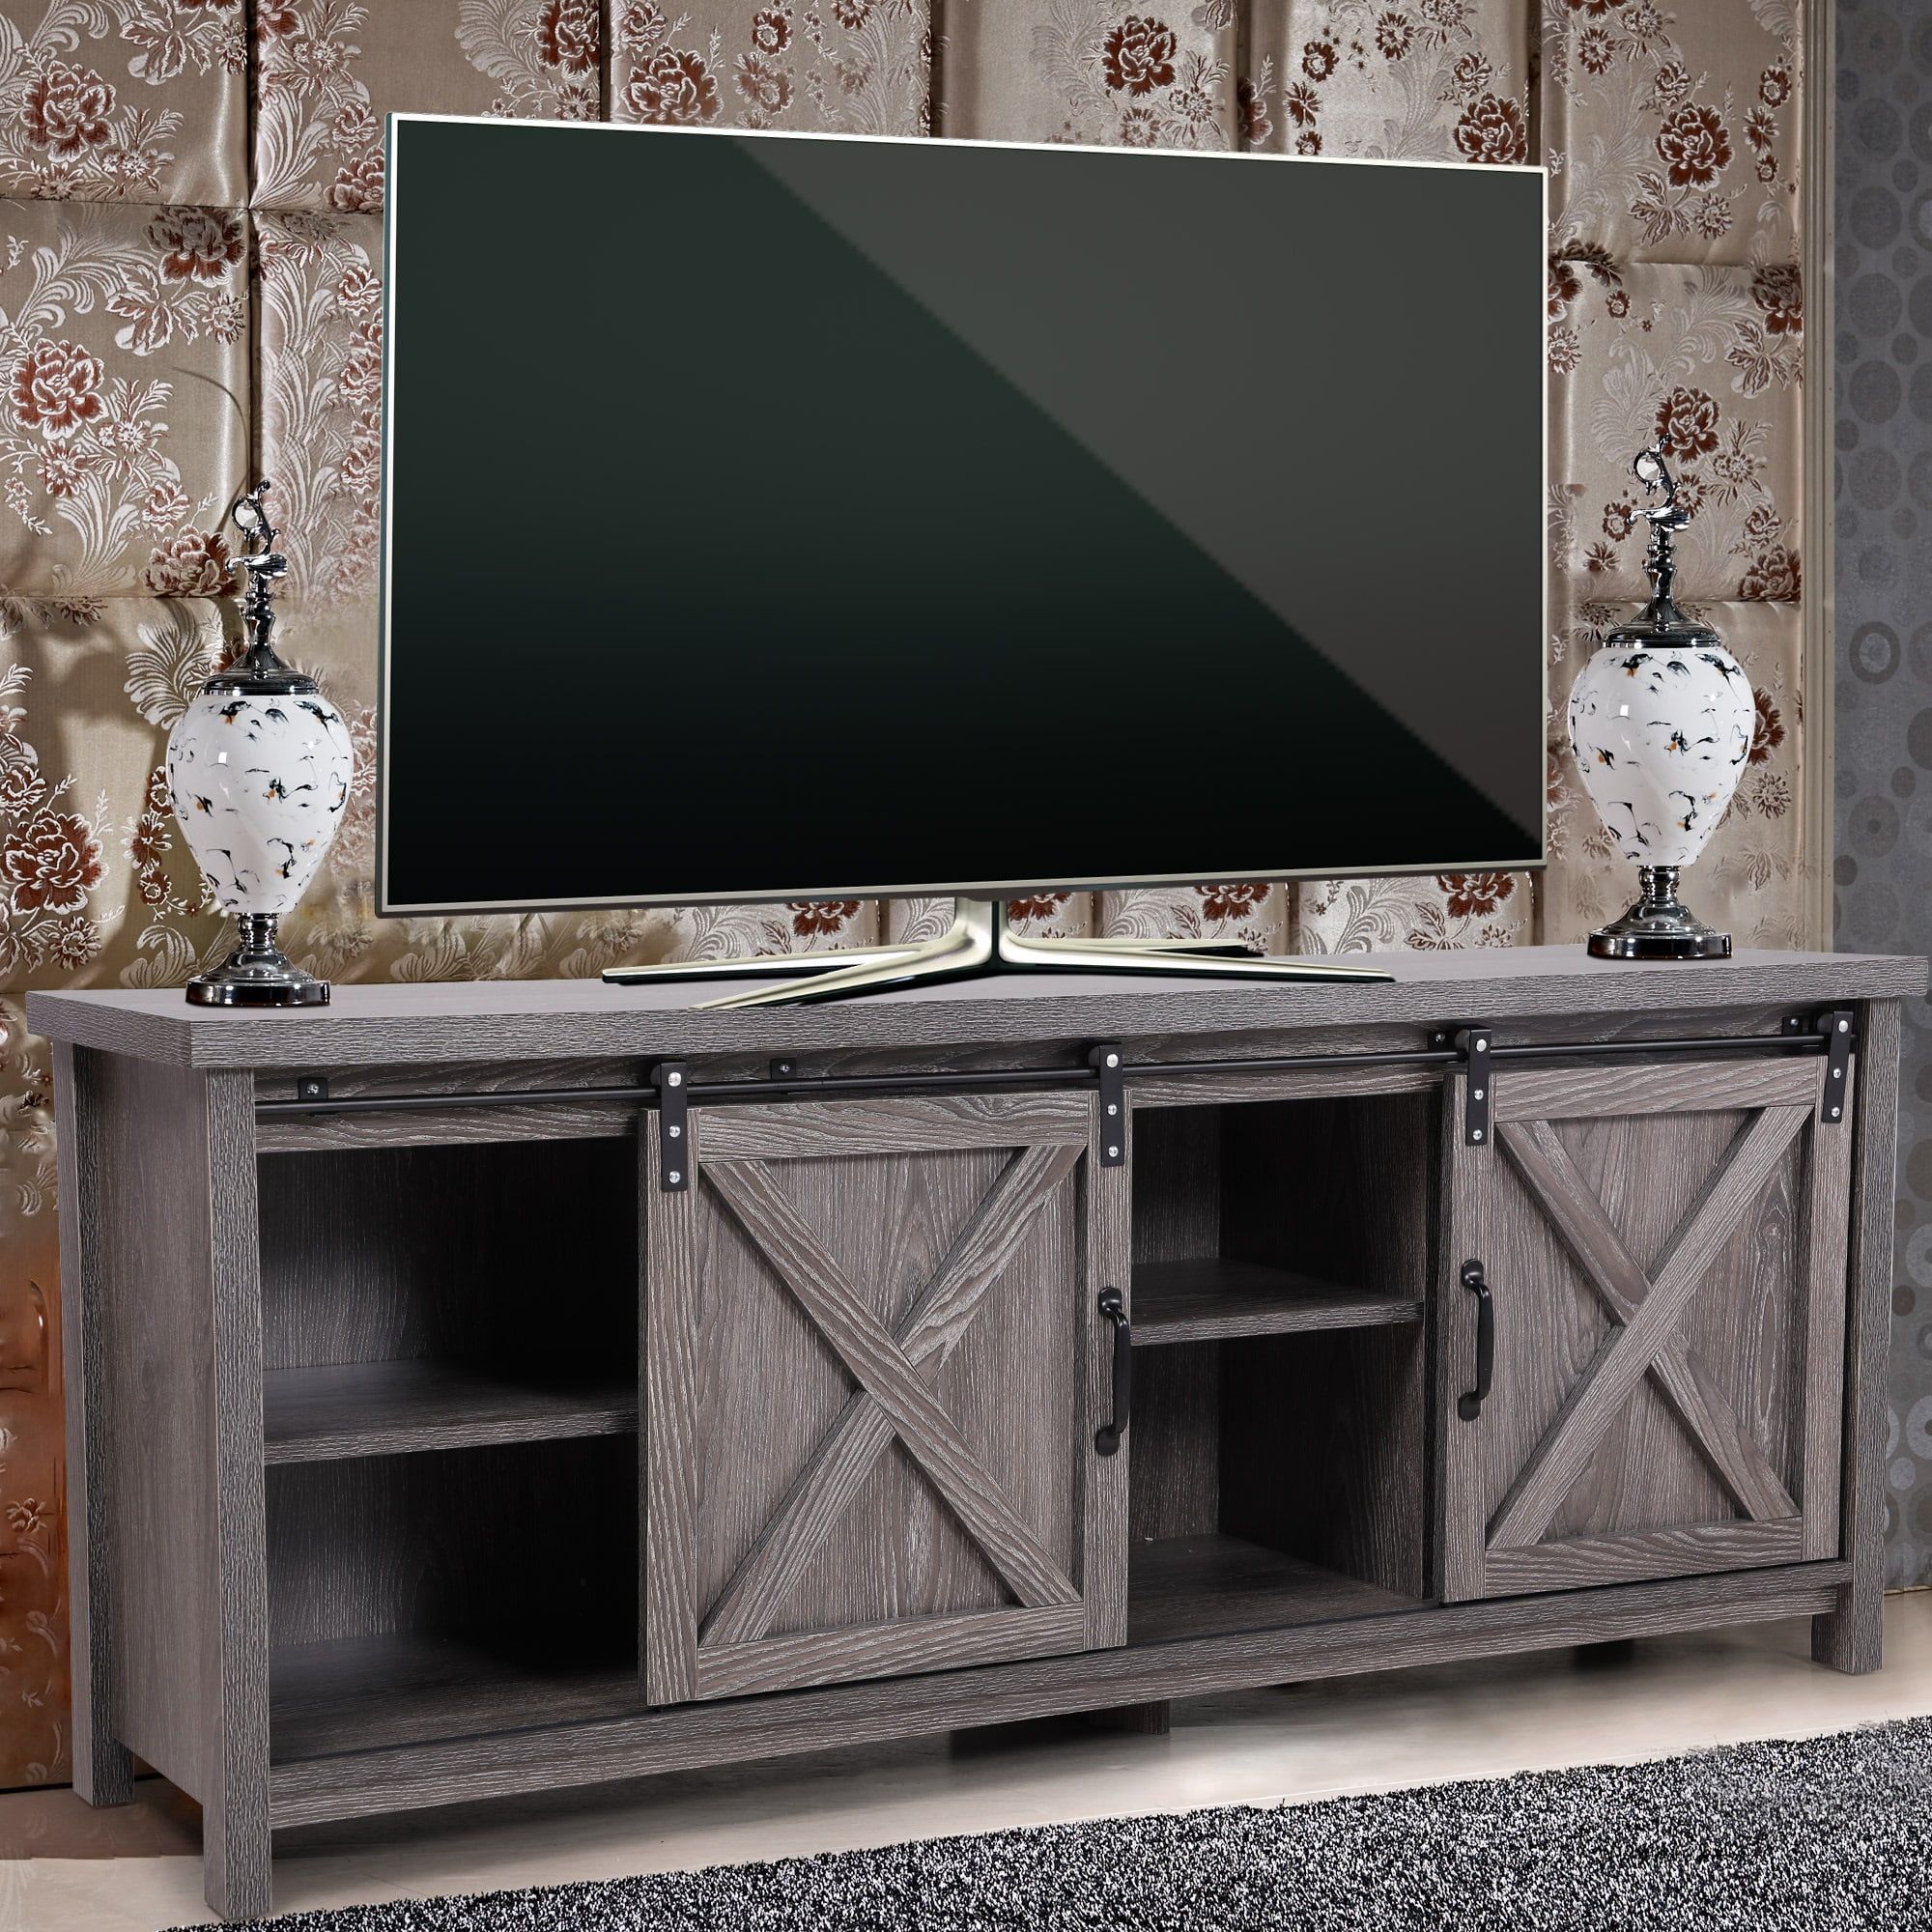 Jaxpety 58" Farmhouse Sliding Barn Door Tv Stand For Tvs Up To 65 For Farmhouse Tv Stands (View 10 of 20)